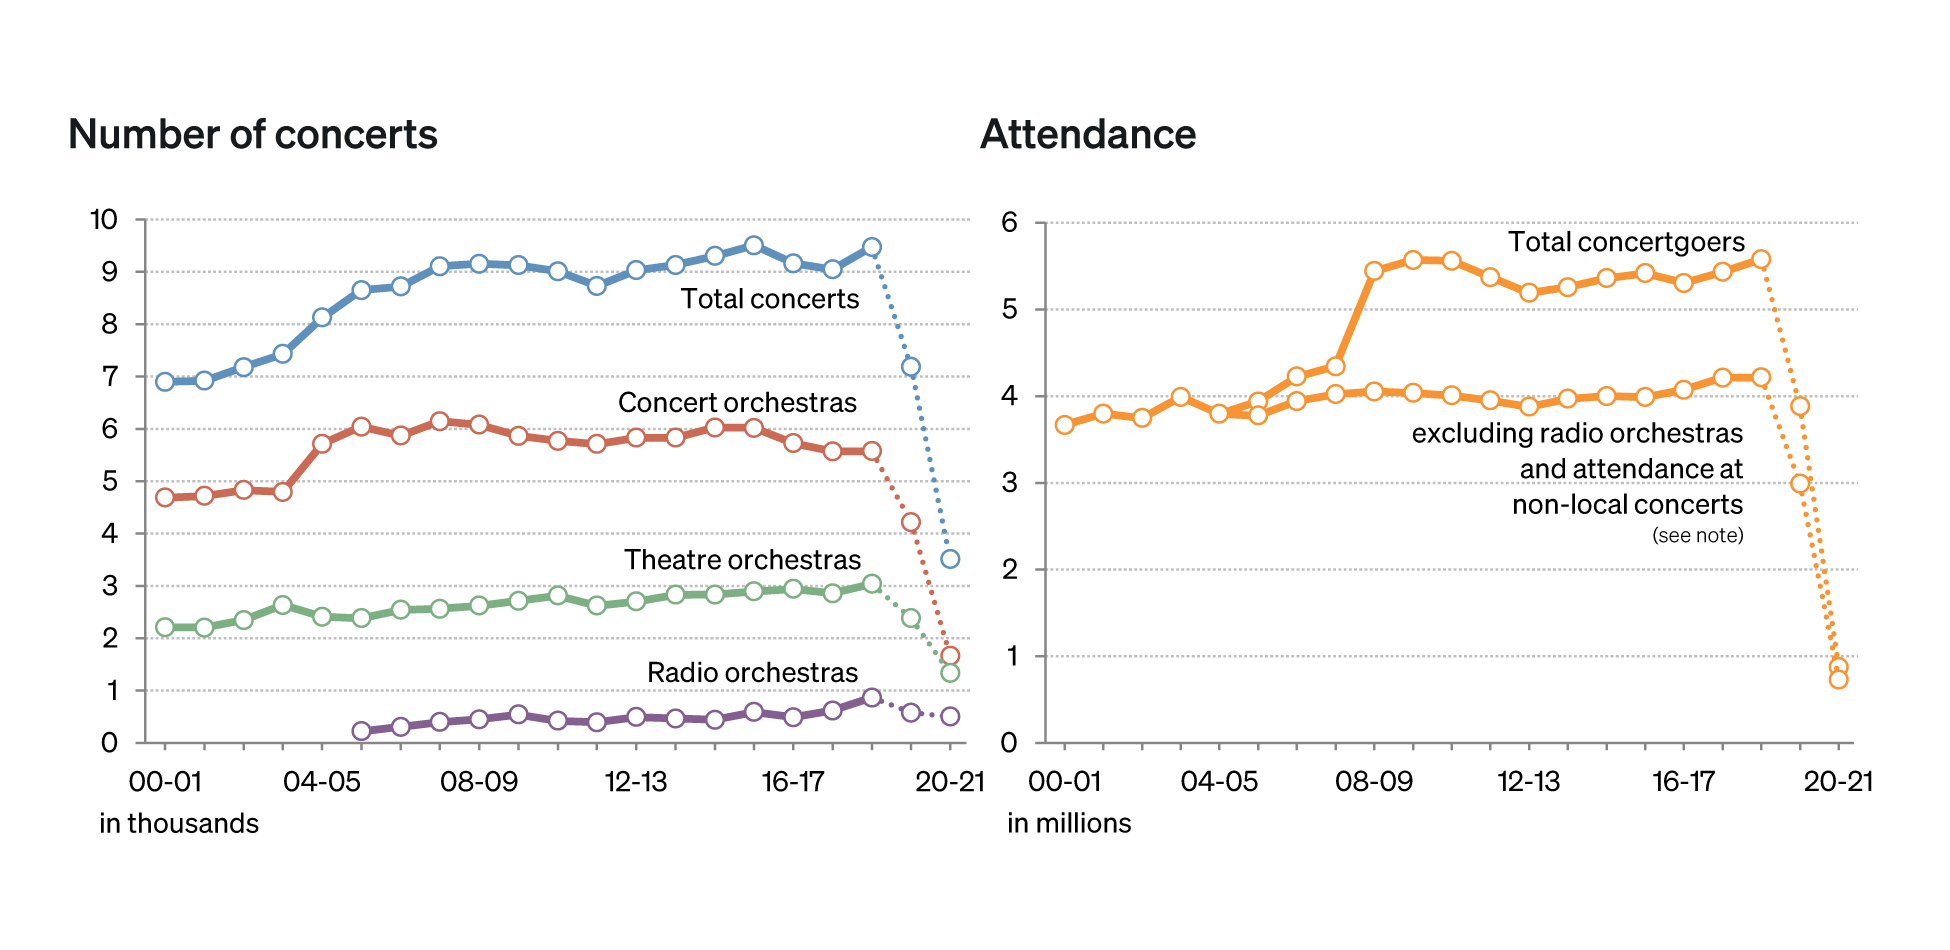 Image: Concert and attendance numbers from seasons 2000-01 to 2020-21